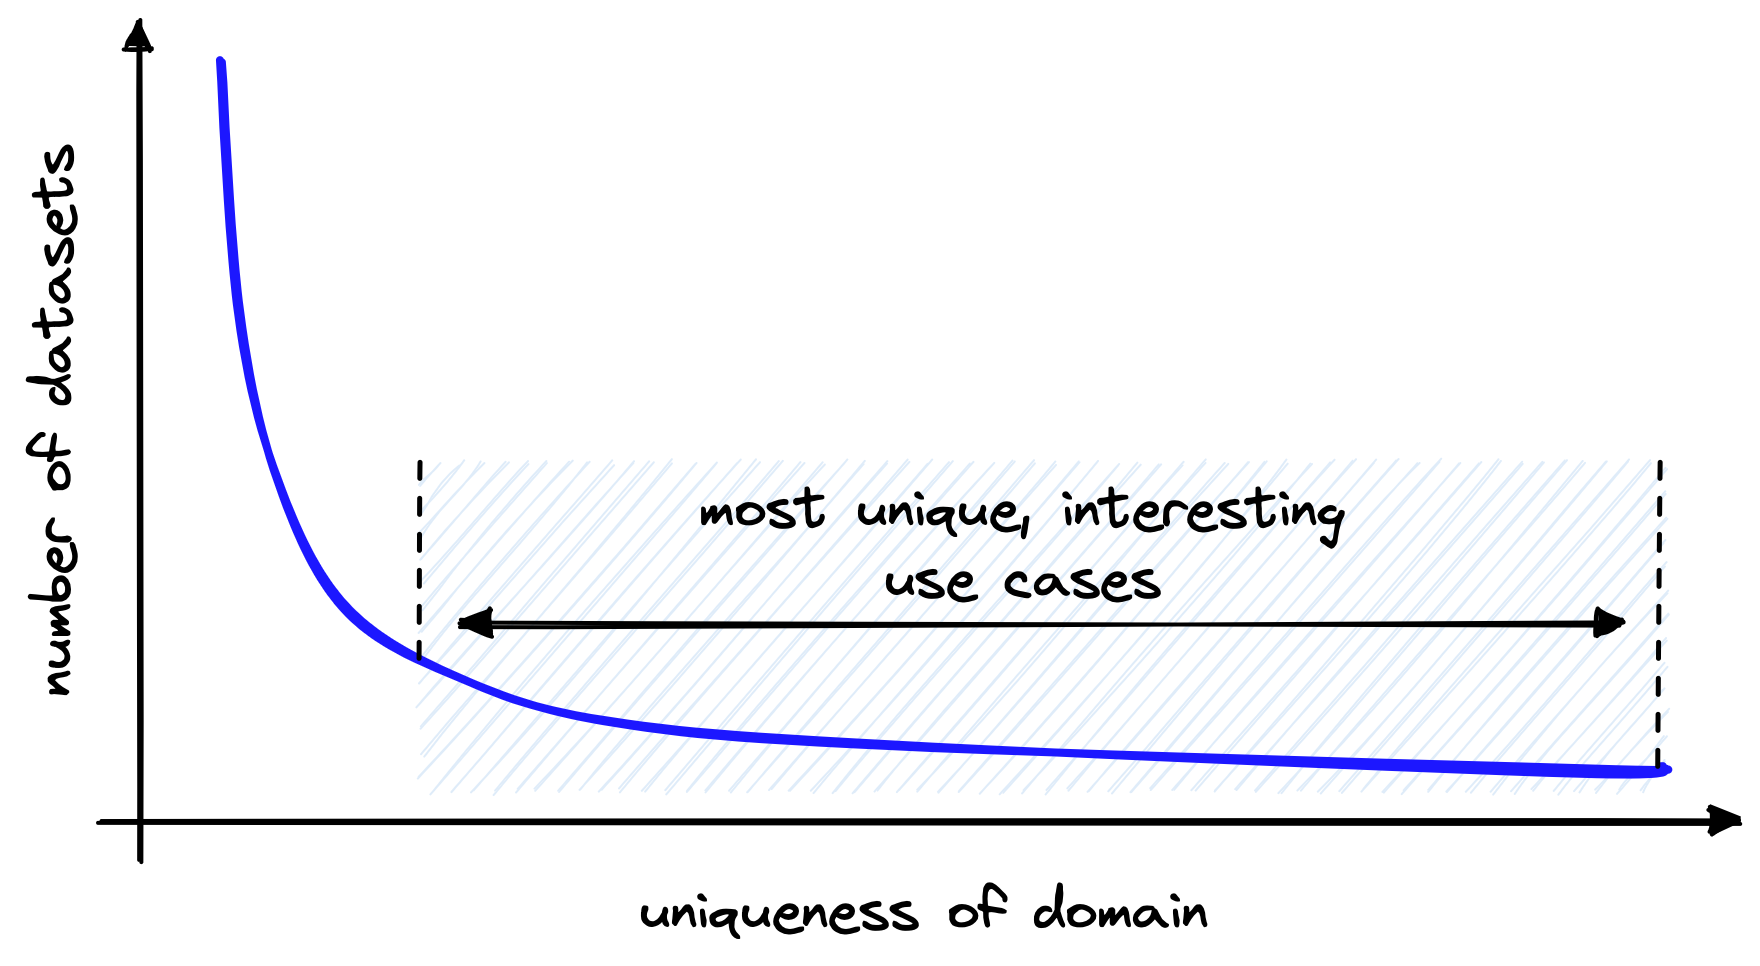 datasets_and_uniqueness